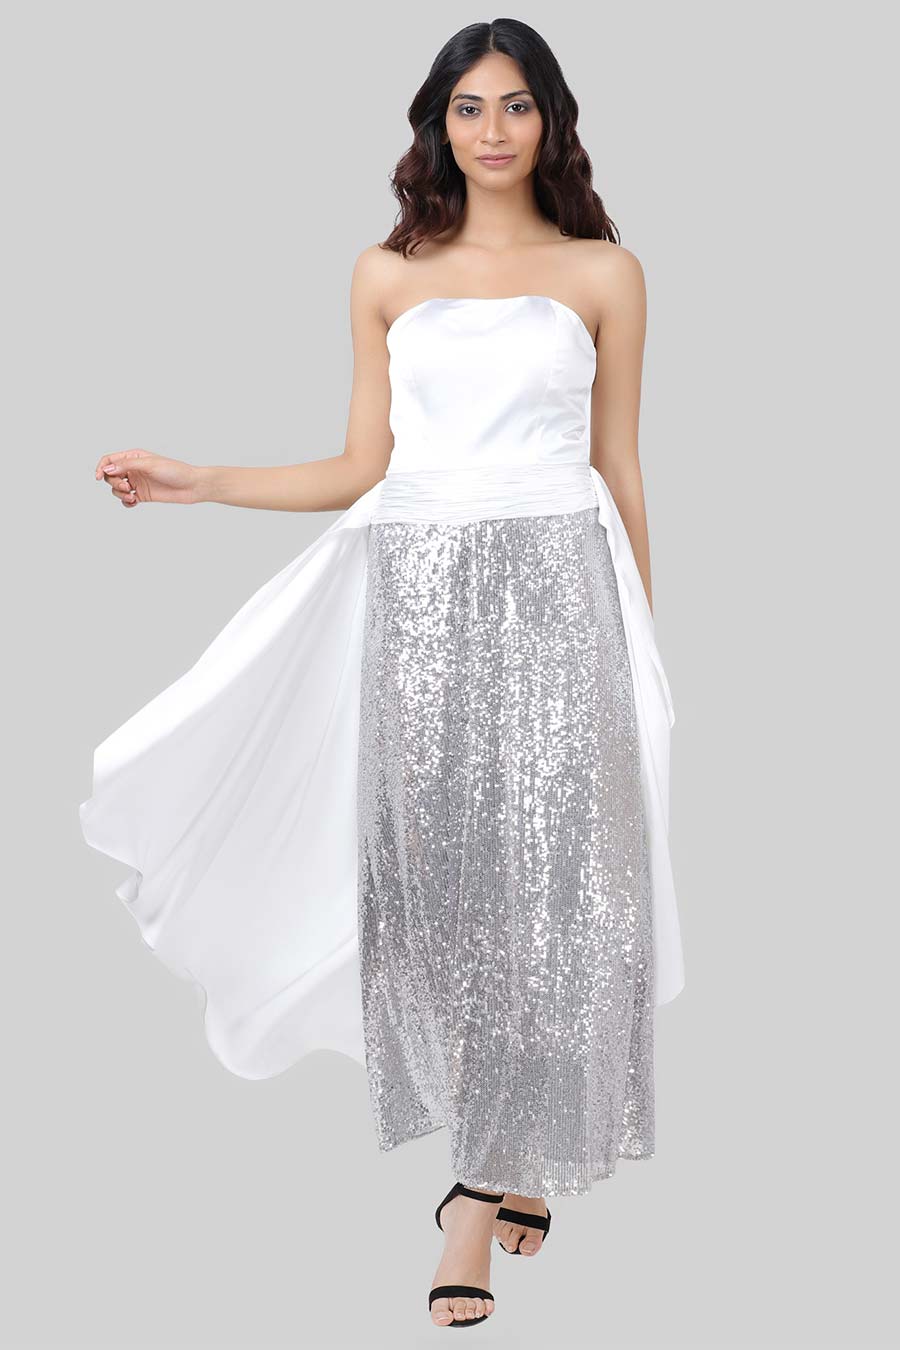 Pearl White Sequin Gown Dress